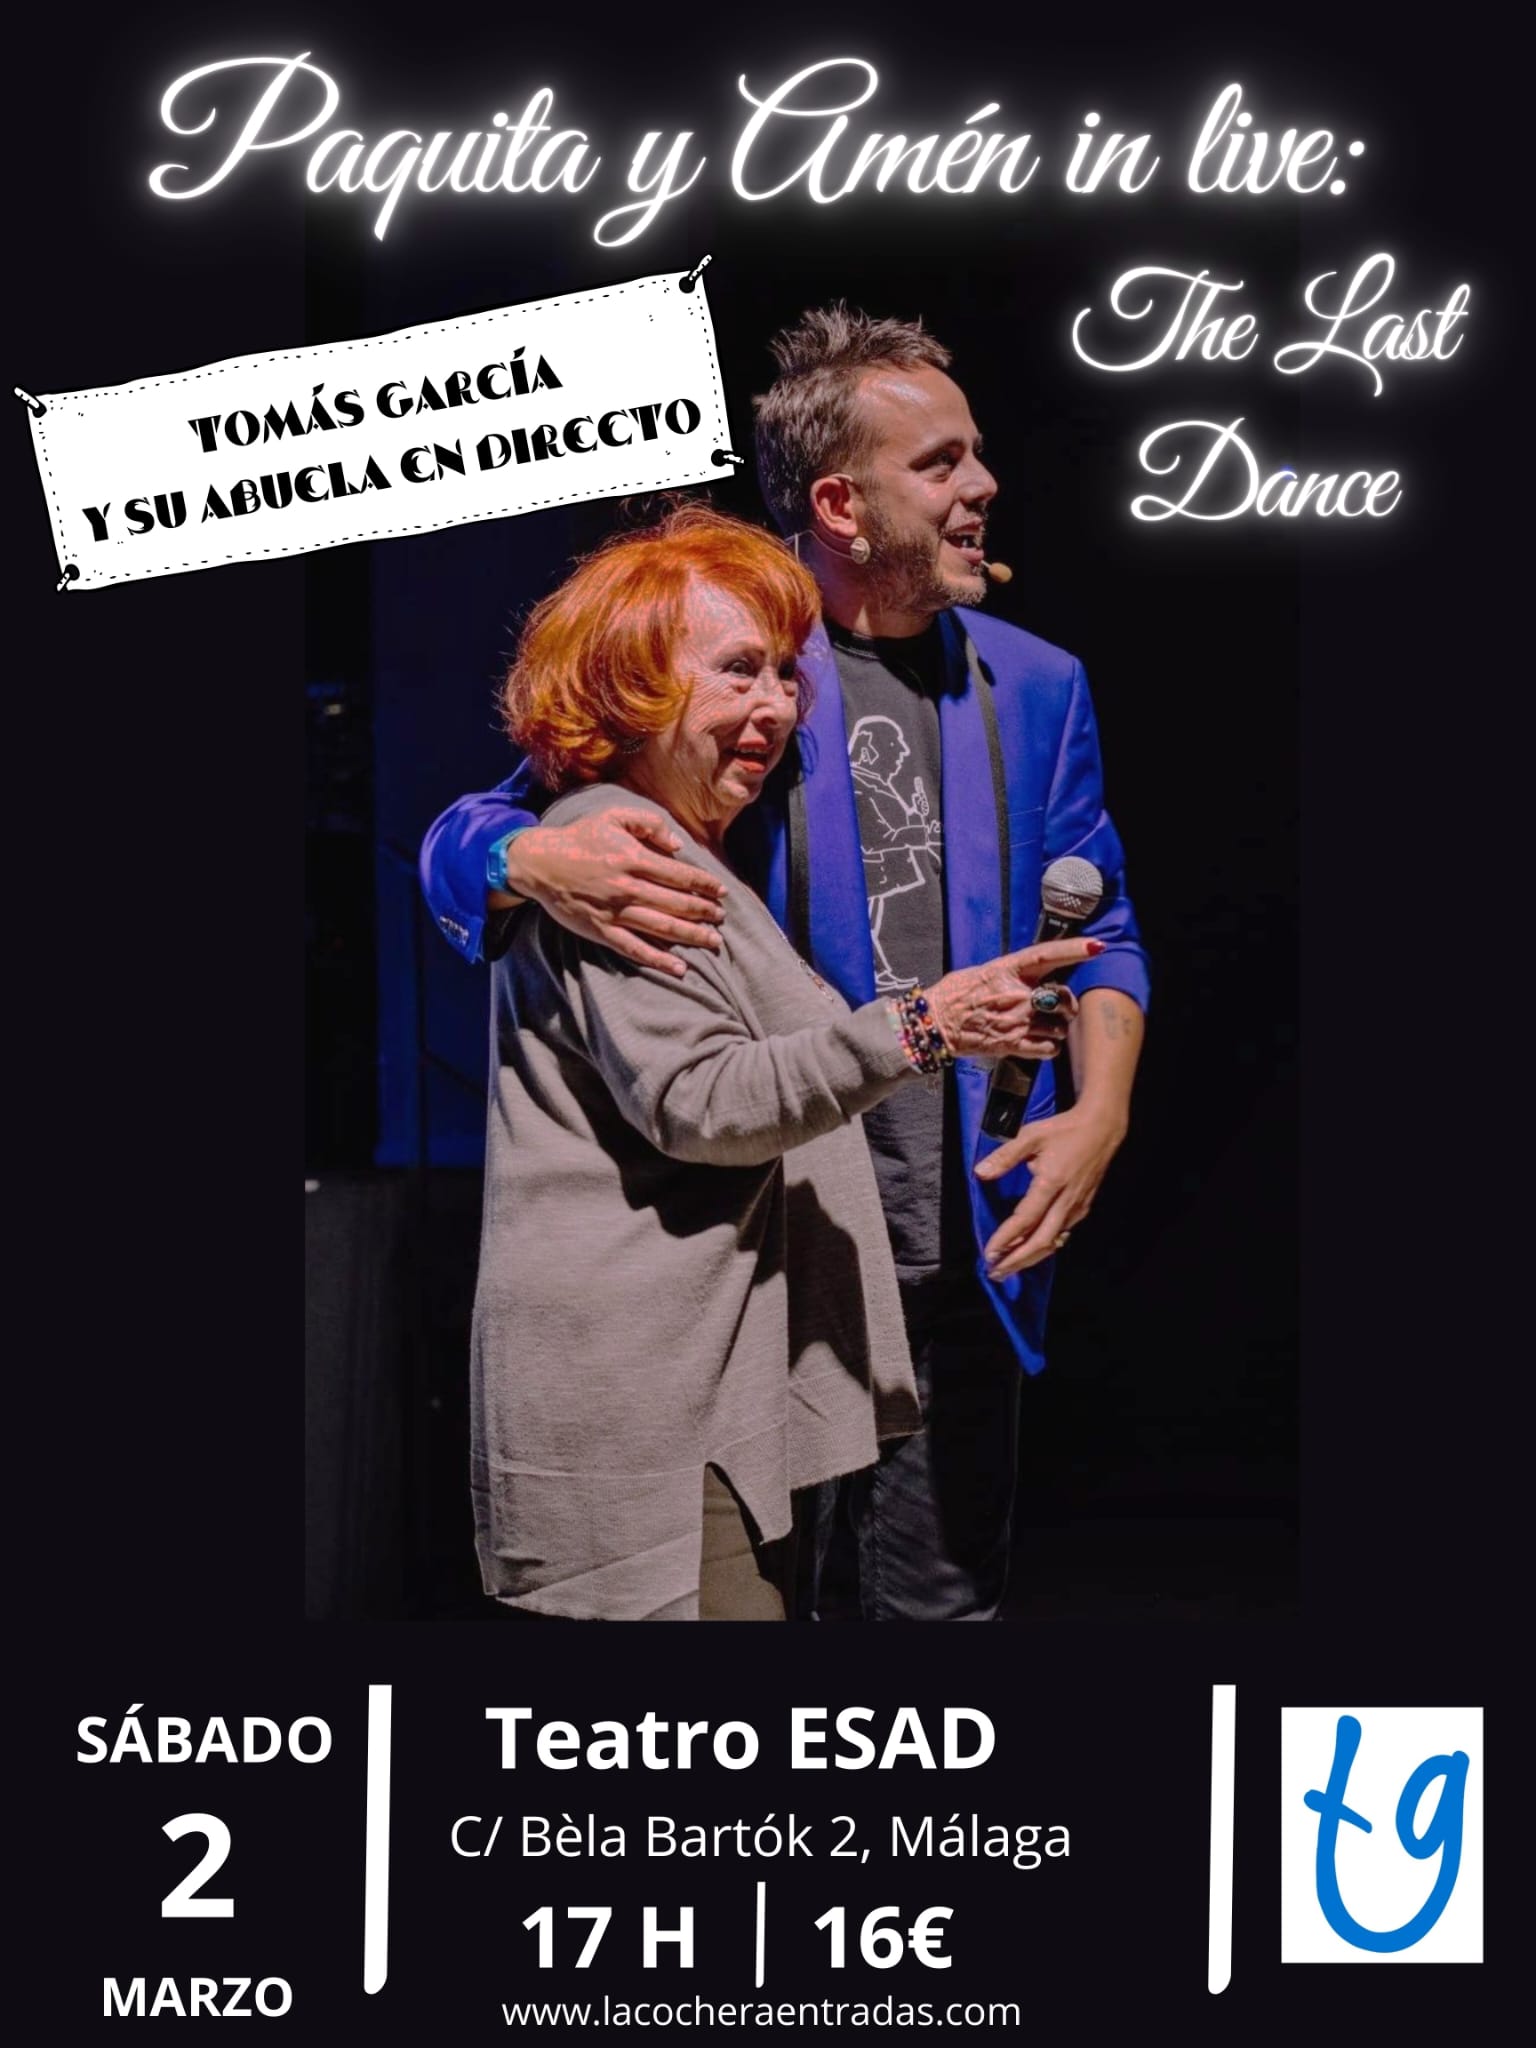 PAQUITA Y AMÉN IN LIVE: THE LAST DANCE